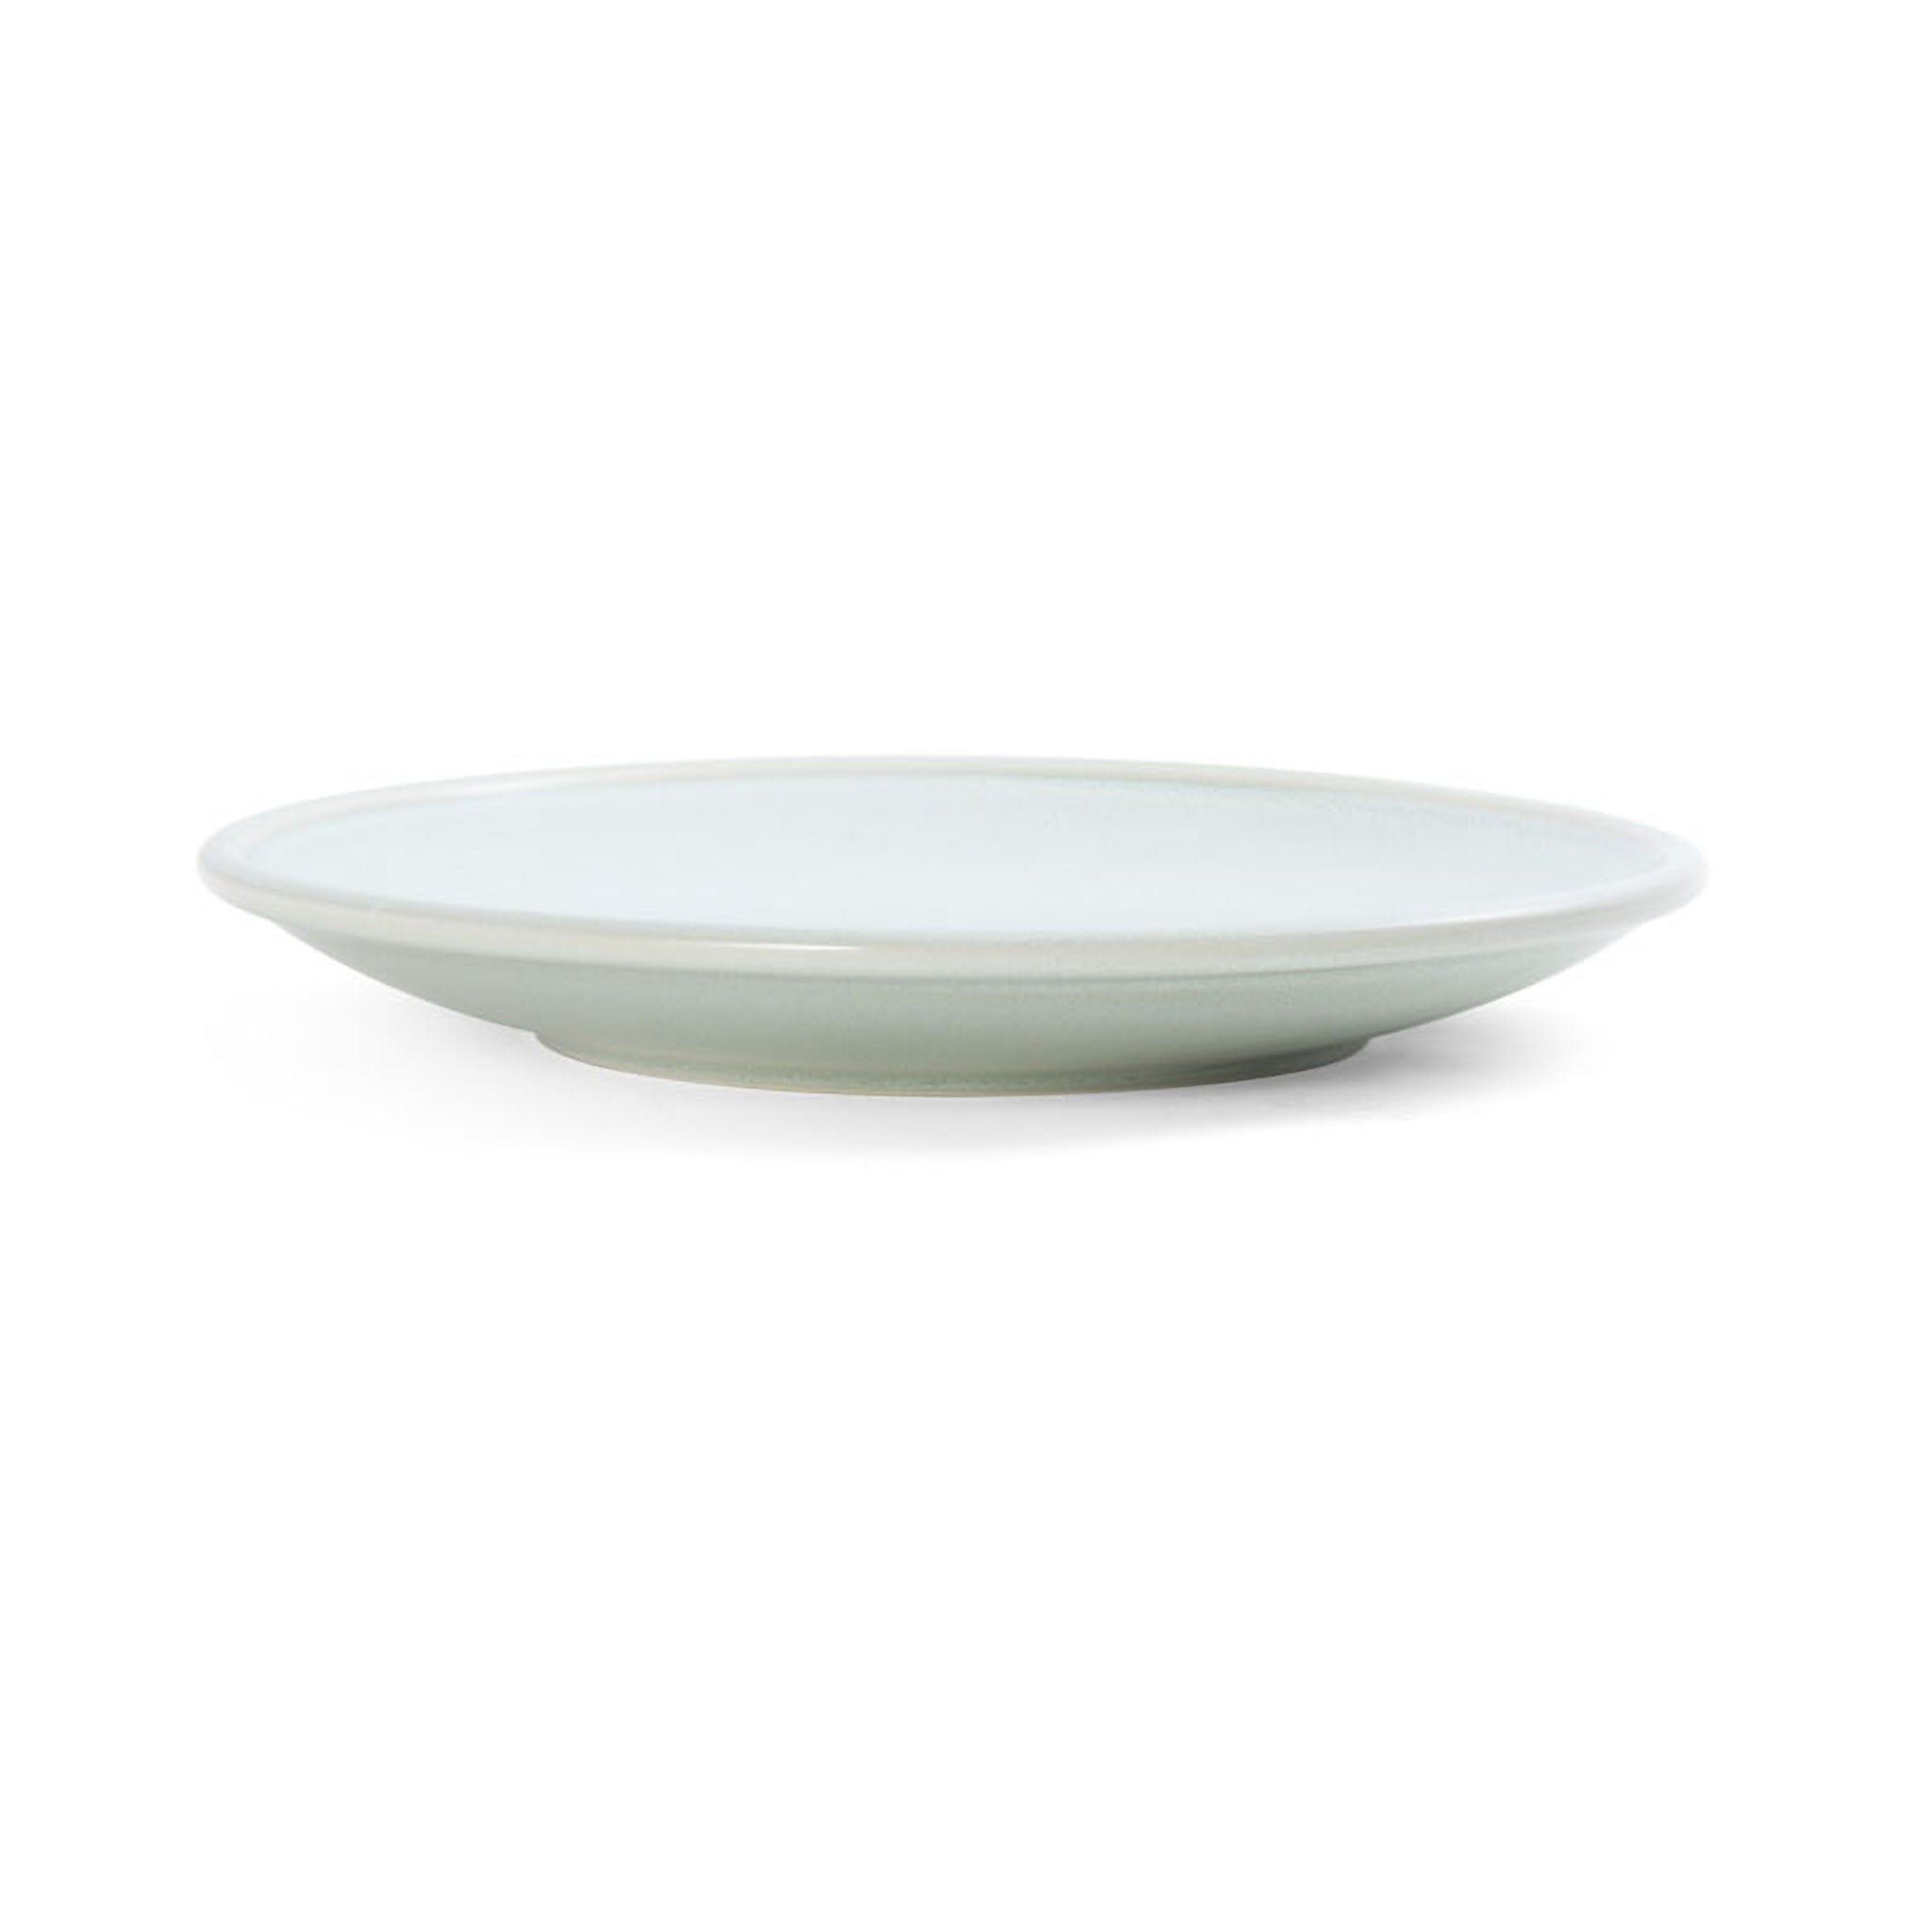 Jade Porcelain Coupe Plate 9.25" Green